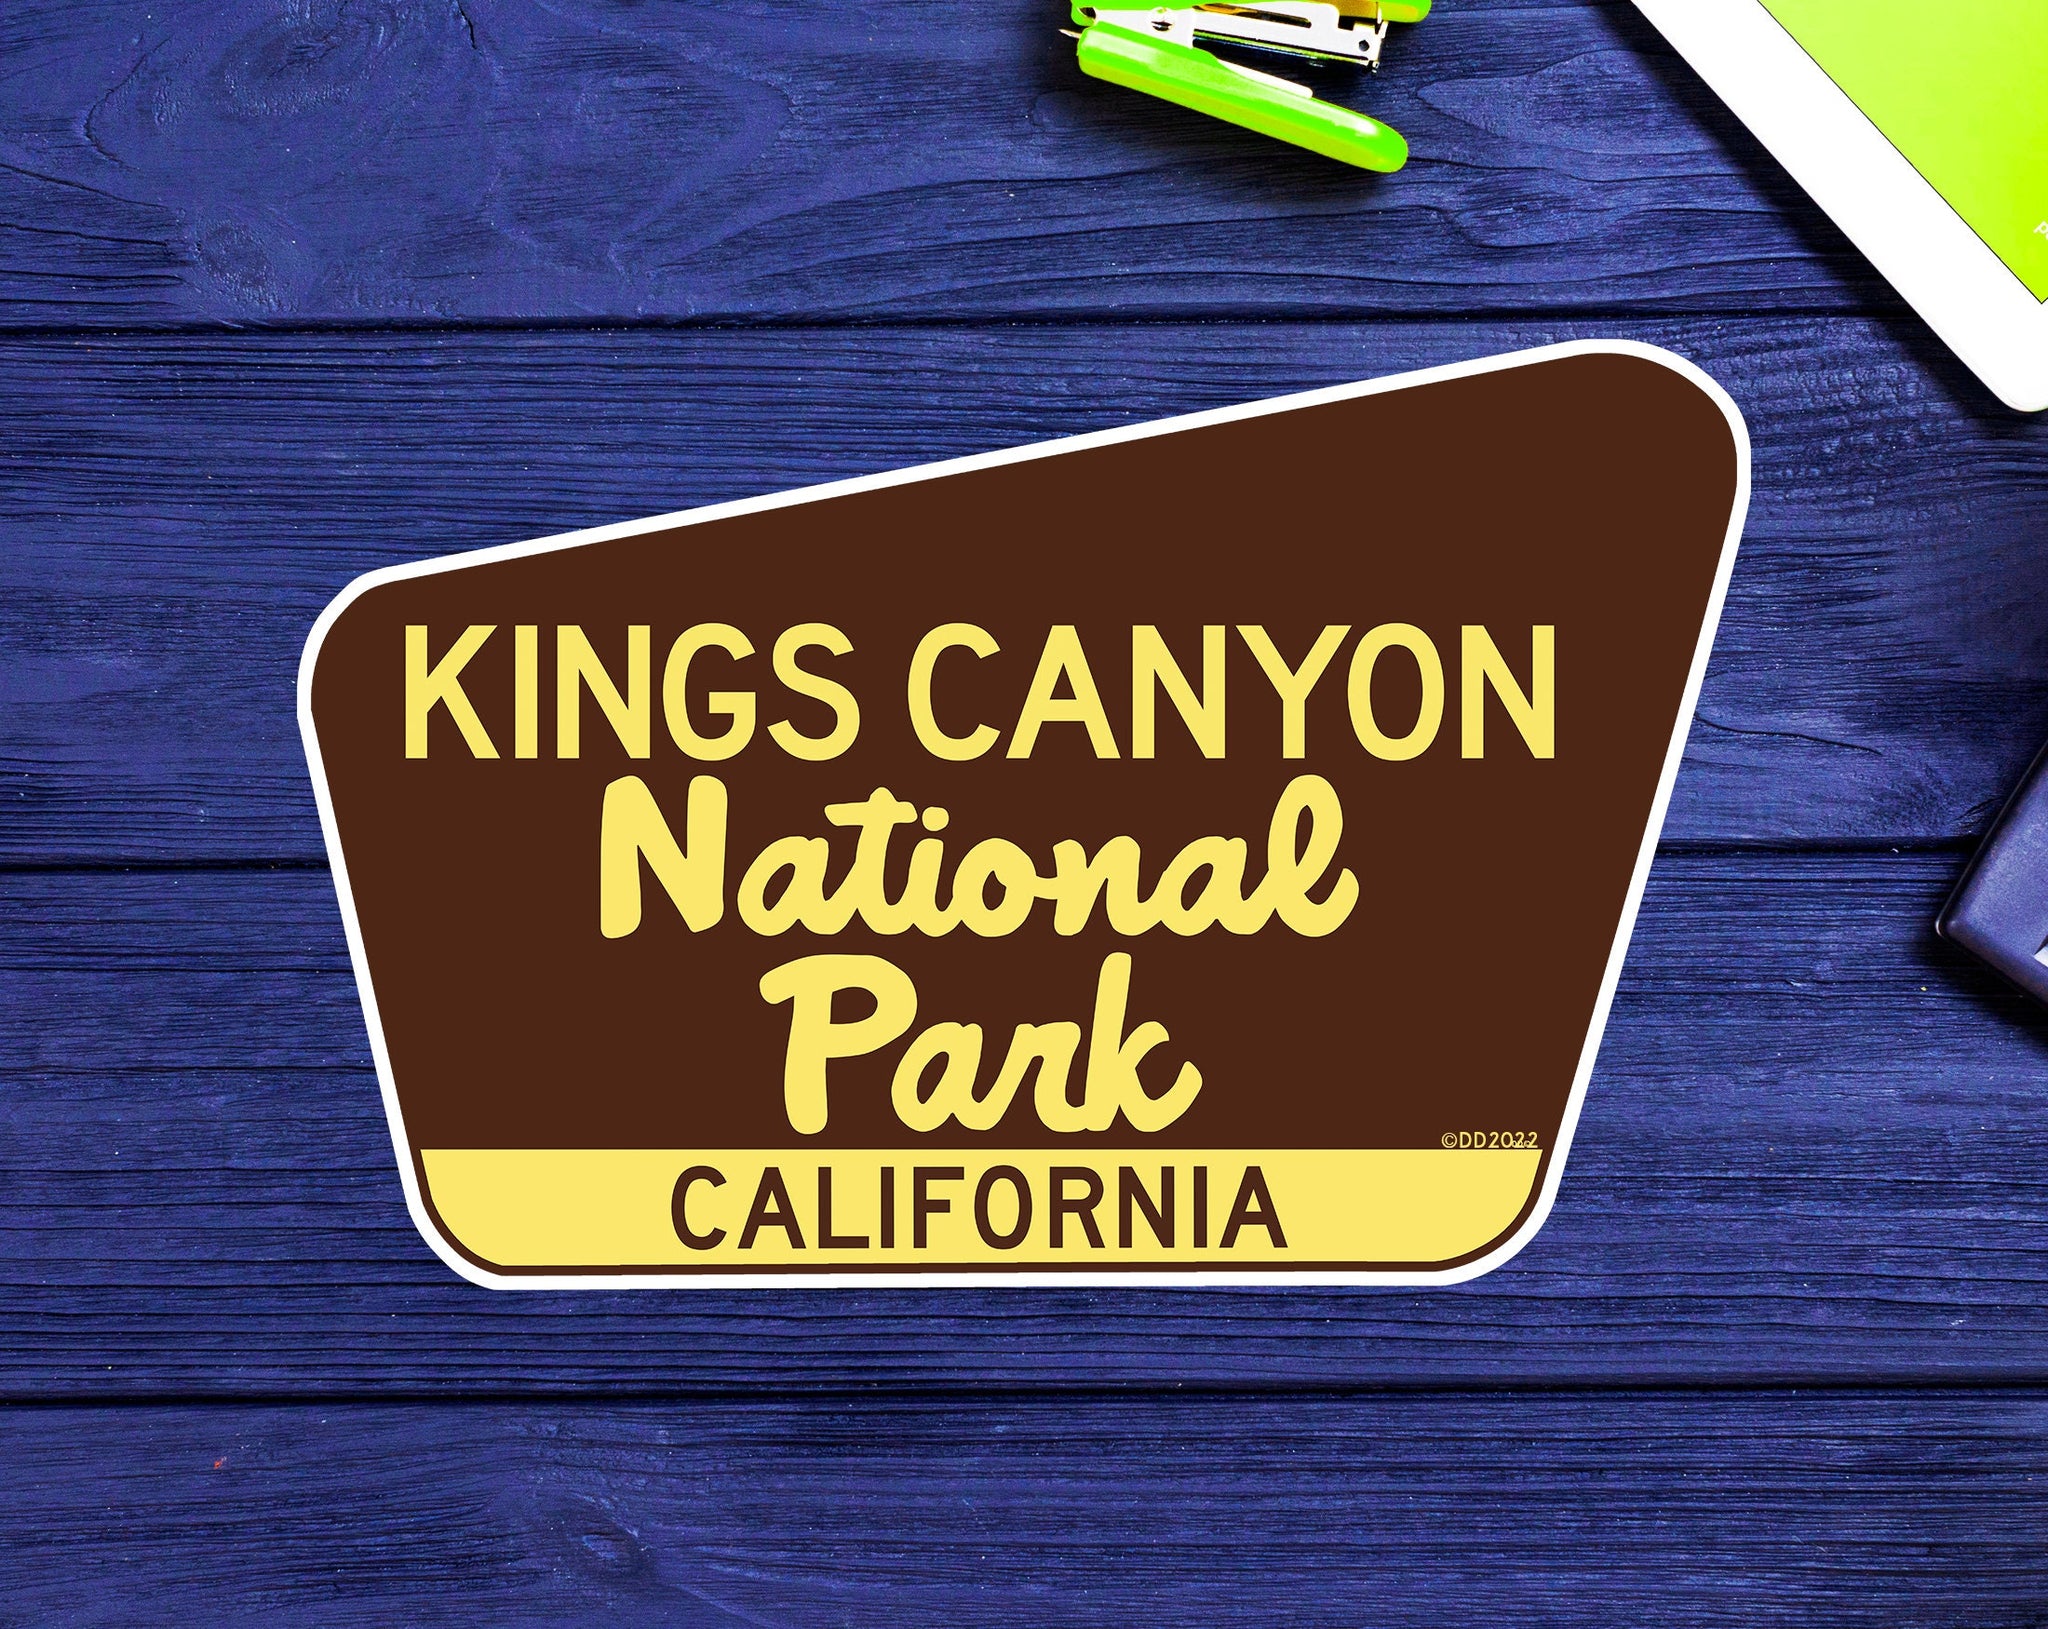 Kings Canyon National Park California Decal Sticker Vinyl 3.75" Mountains Explore Hiking Camping